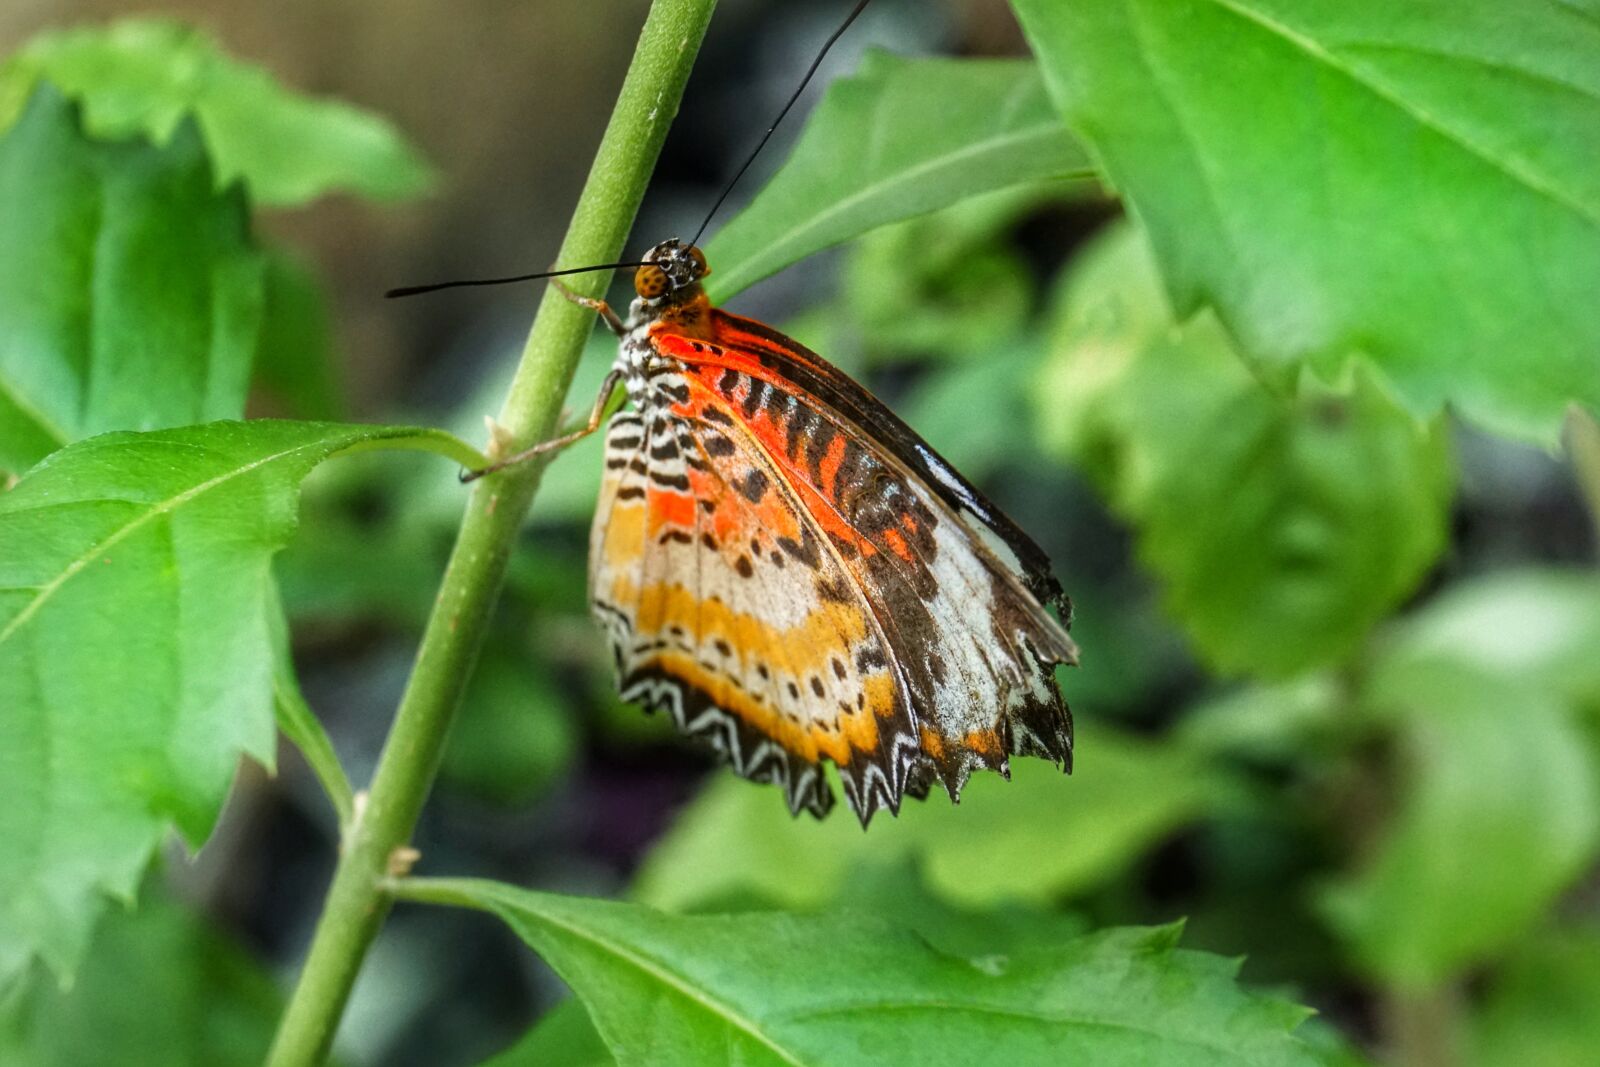 Sony a6300 sample photo. Butterfly, leopard lacewing, nature photography